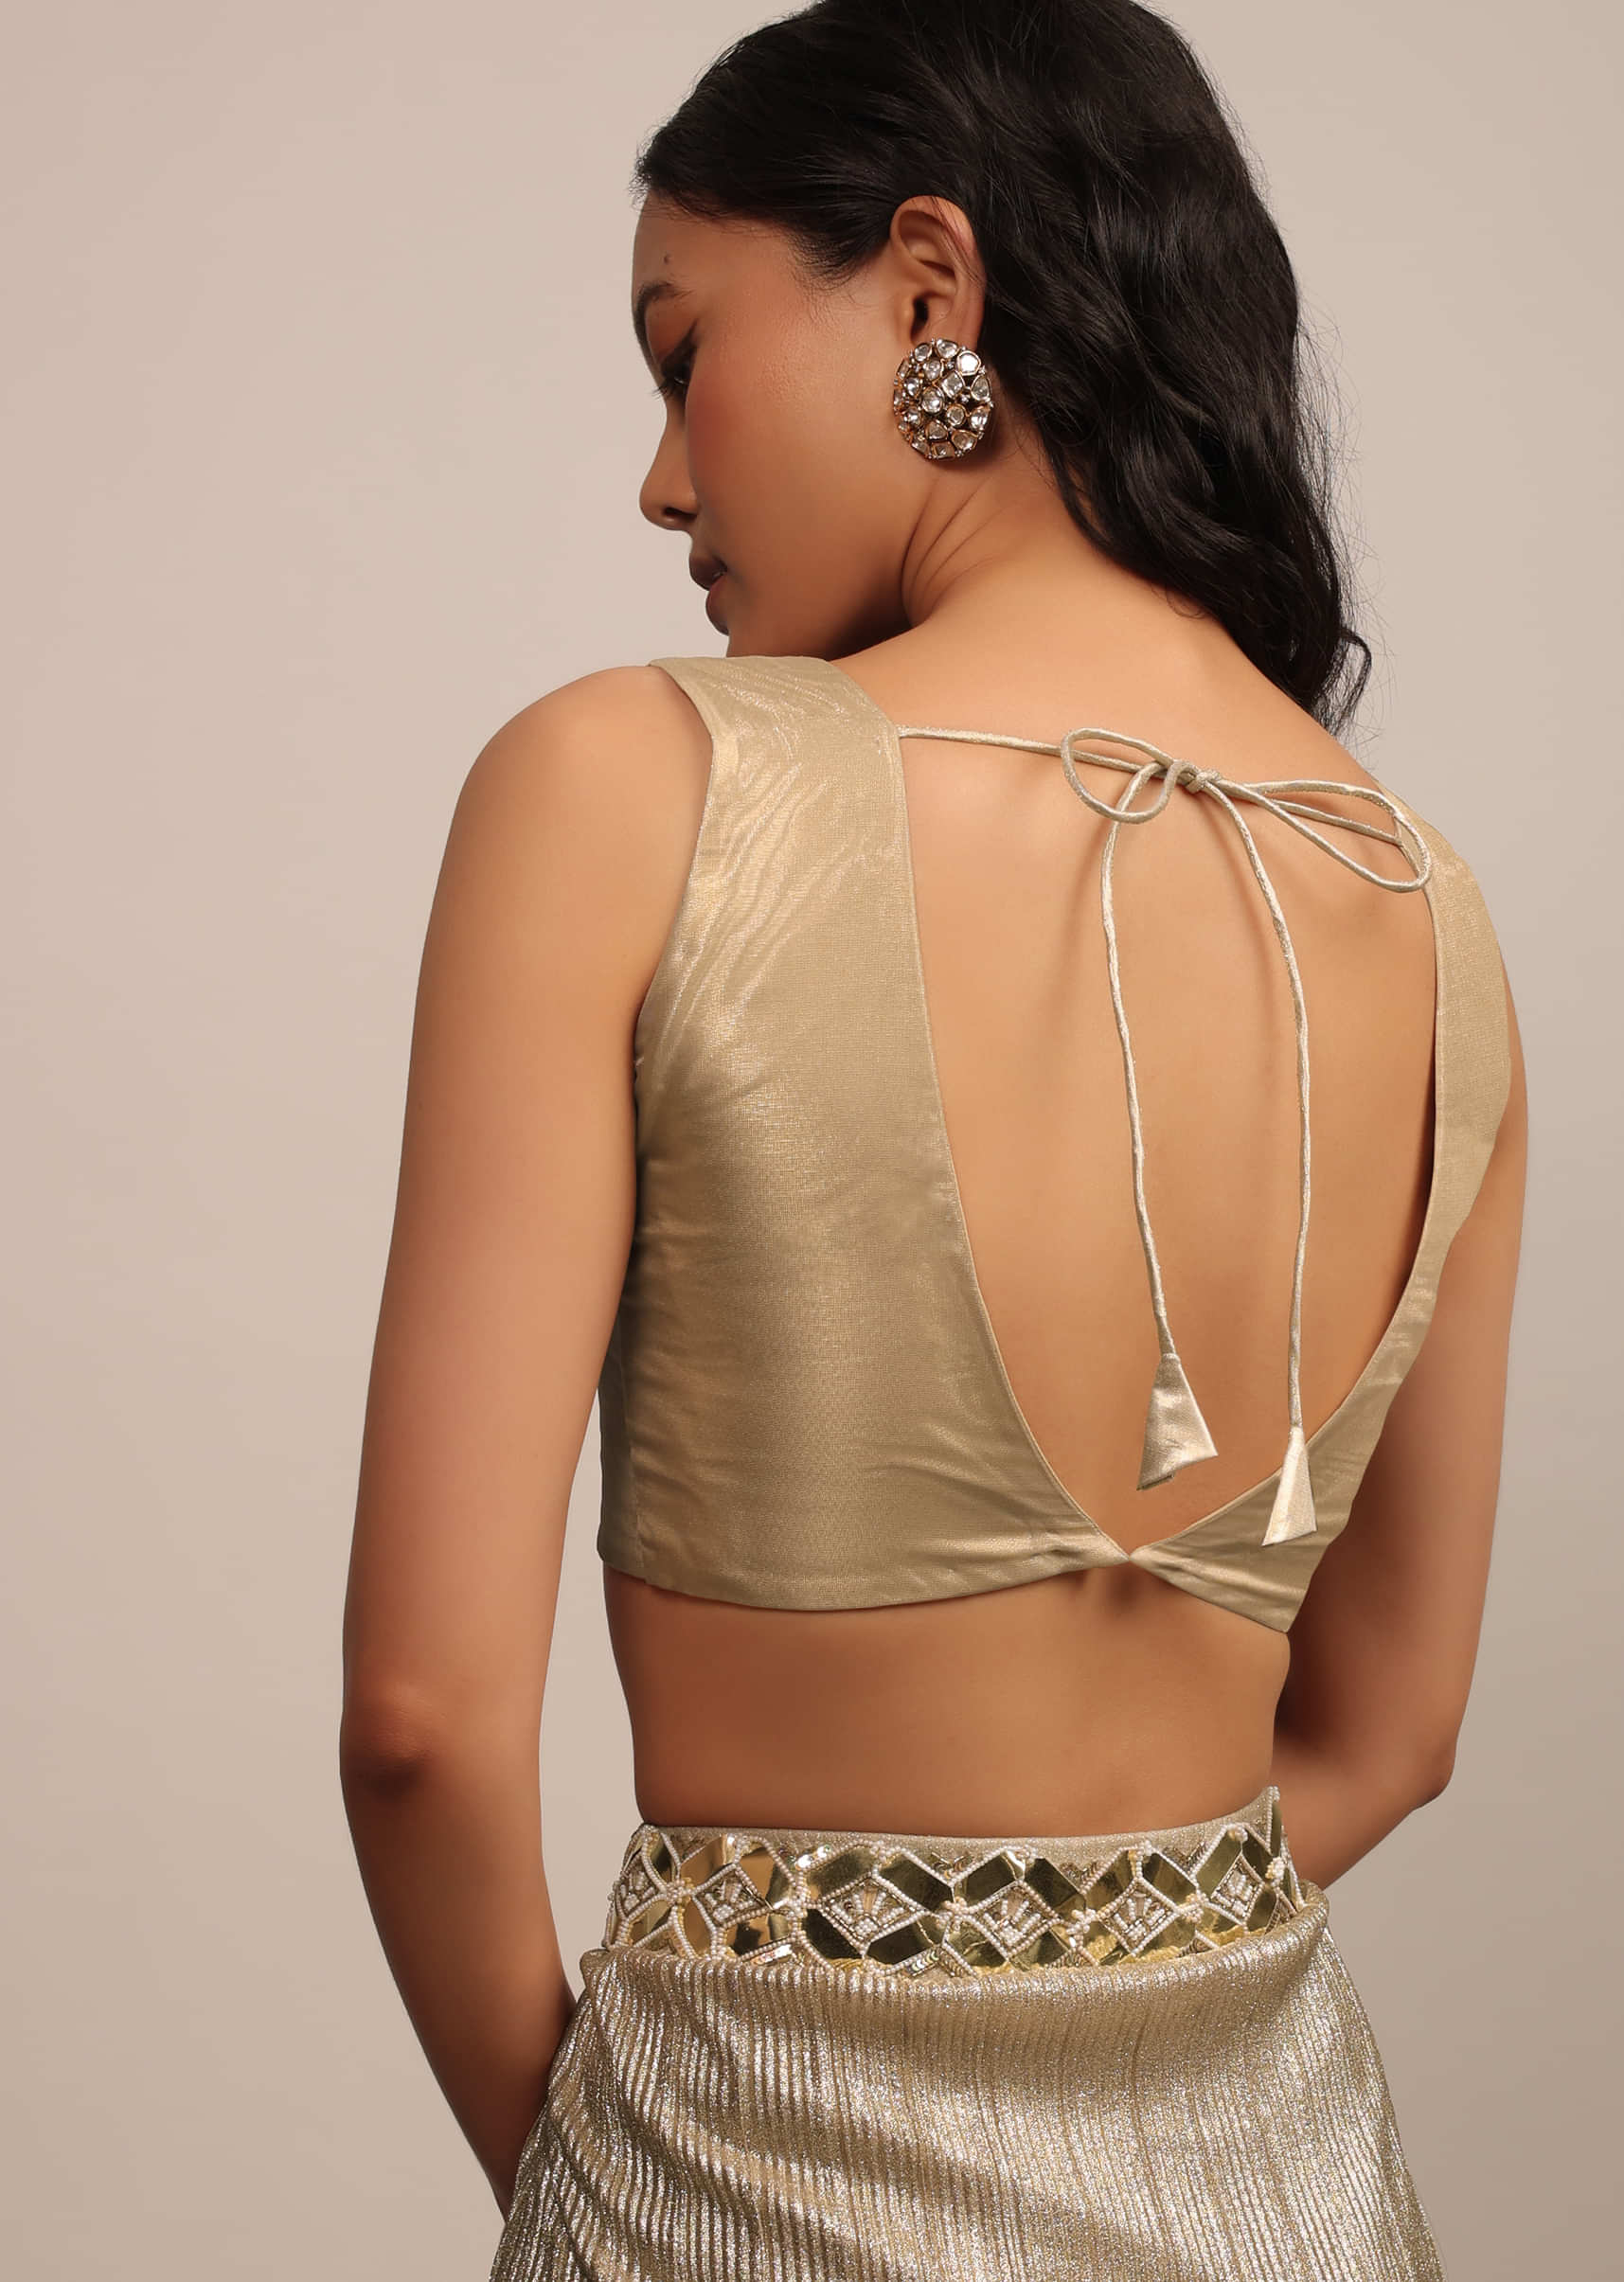 Dusty Gold Sleeveless Blouse In Jute Organza Fabric With A V-Neckline